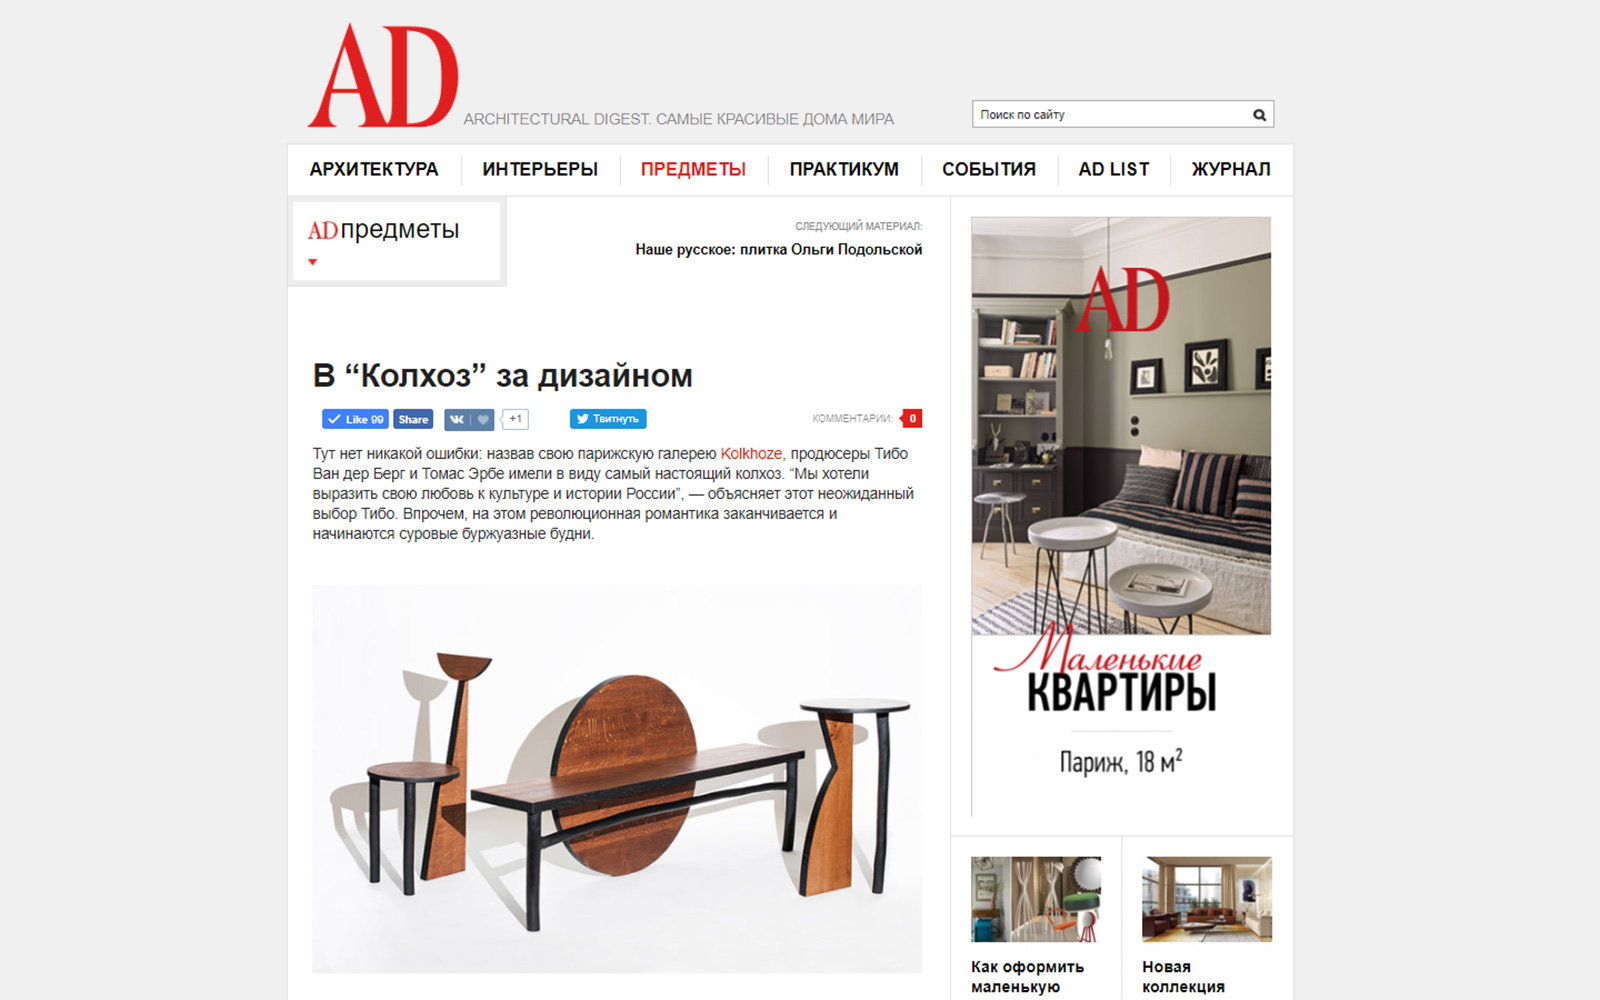 Lodge collection by Frederic Pellenq on kolkhoze.fr AD Russia